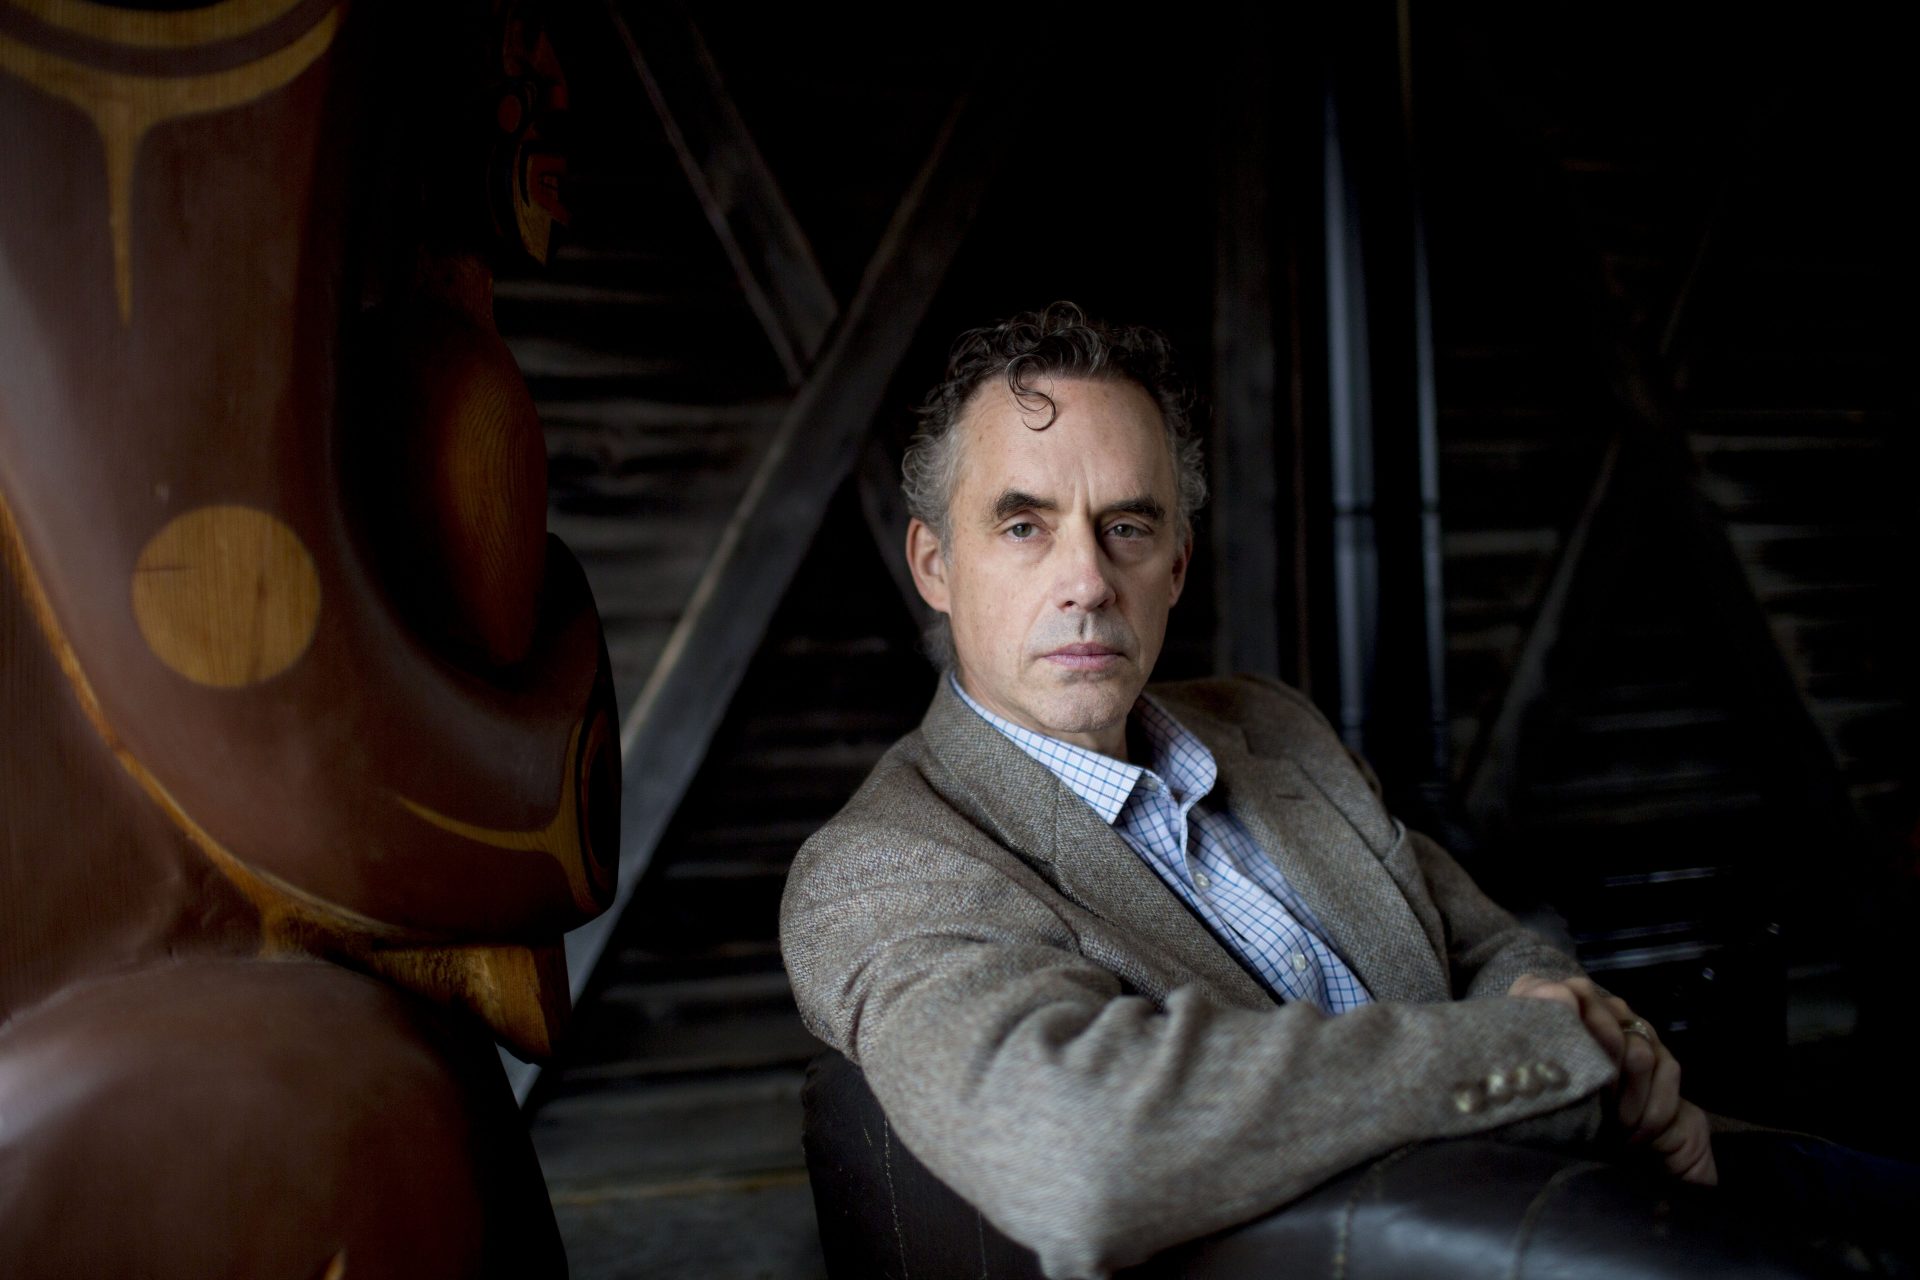 From gender to climate change, Jordan Peterson’s most controversial ideas